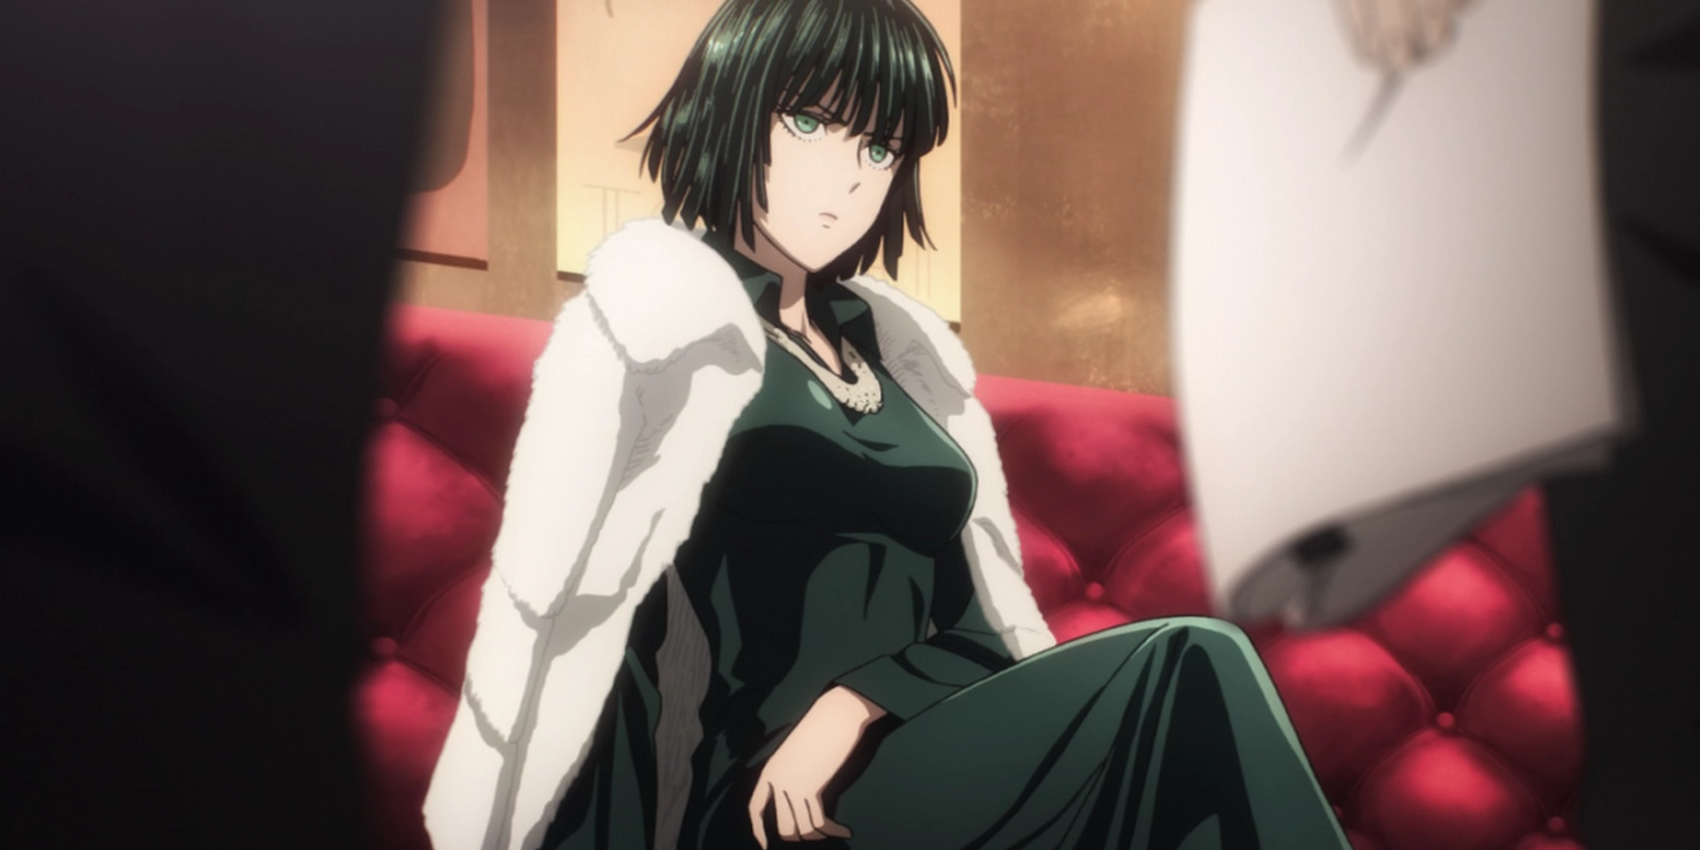 Fubuki sat down on the couch in one Punch Man